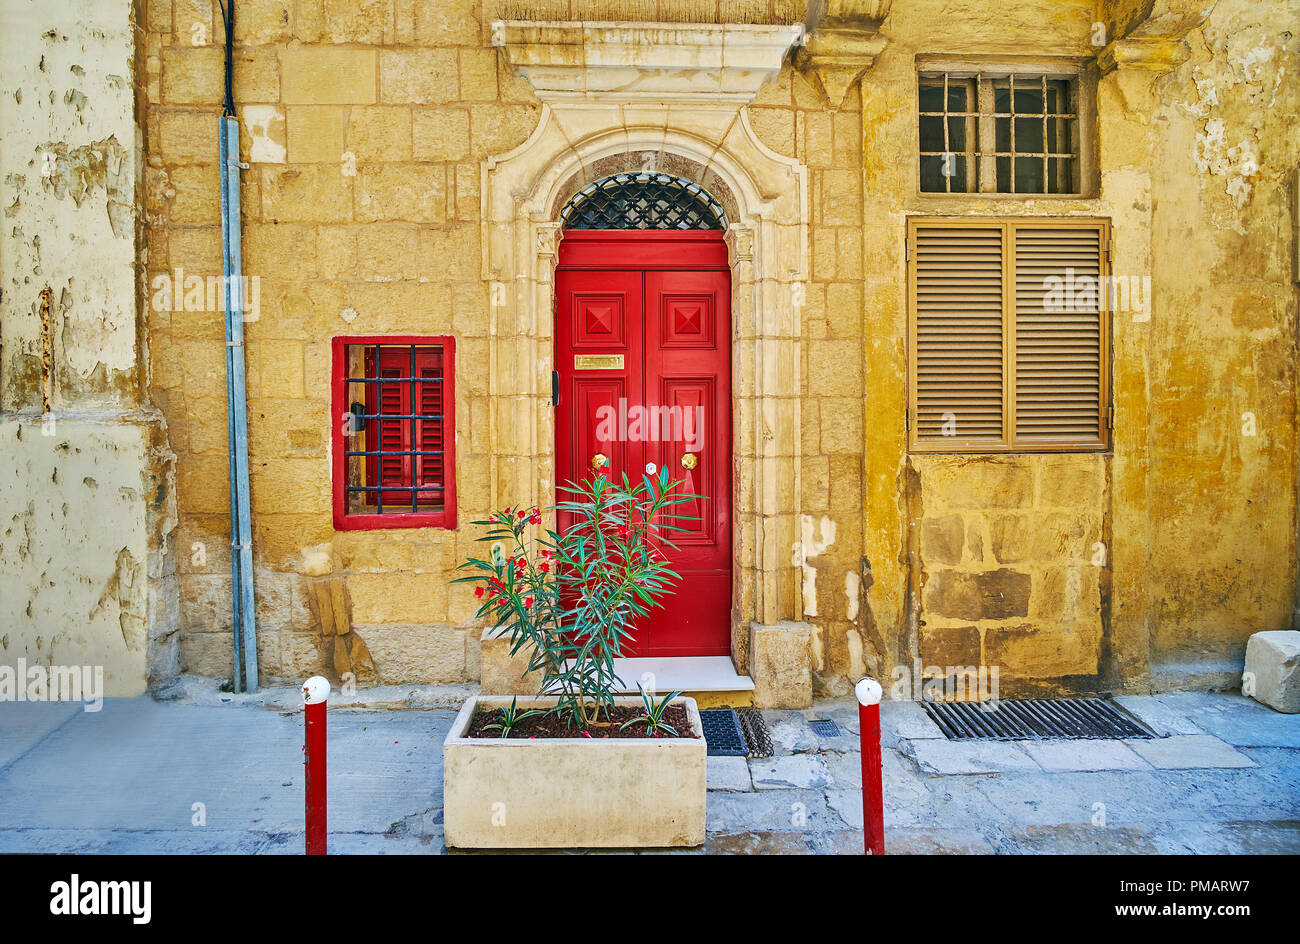 The old stone edifice decorated with wooden bright red door with relief doorframe, St Ursula street, Valletta, Malta. Stock Photo